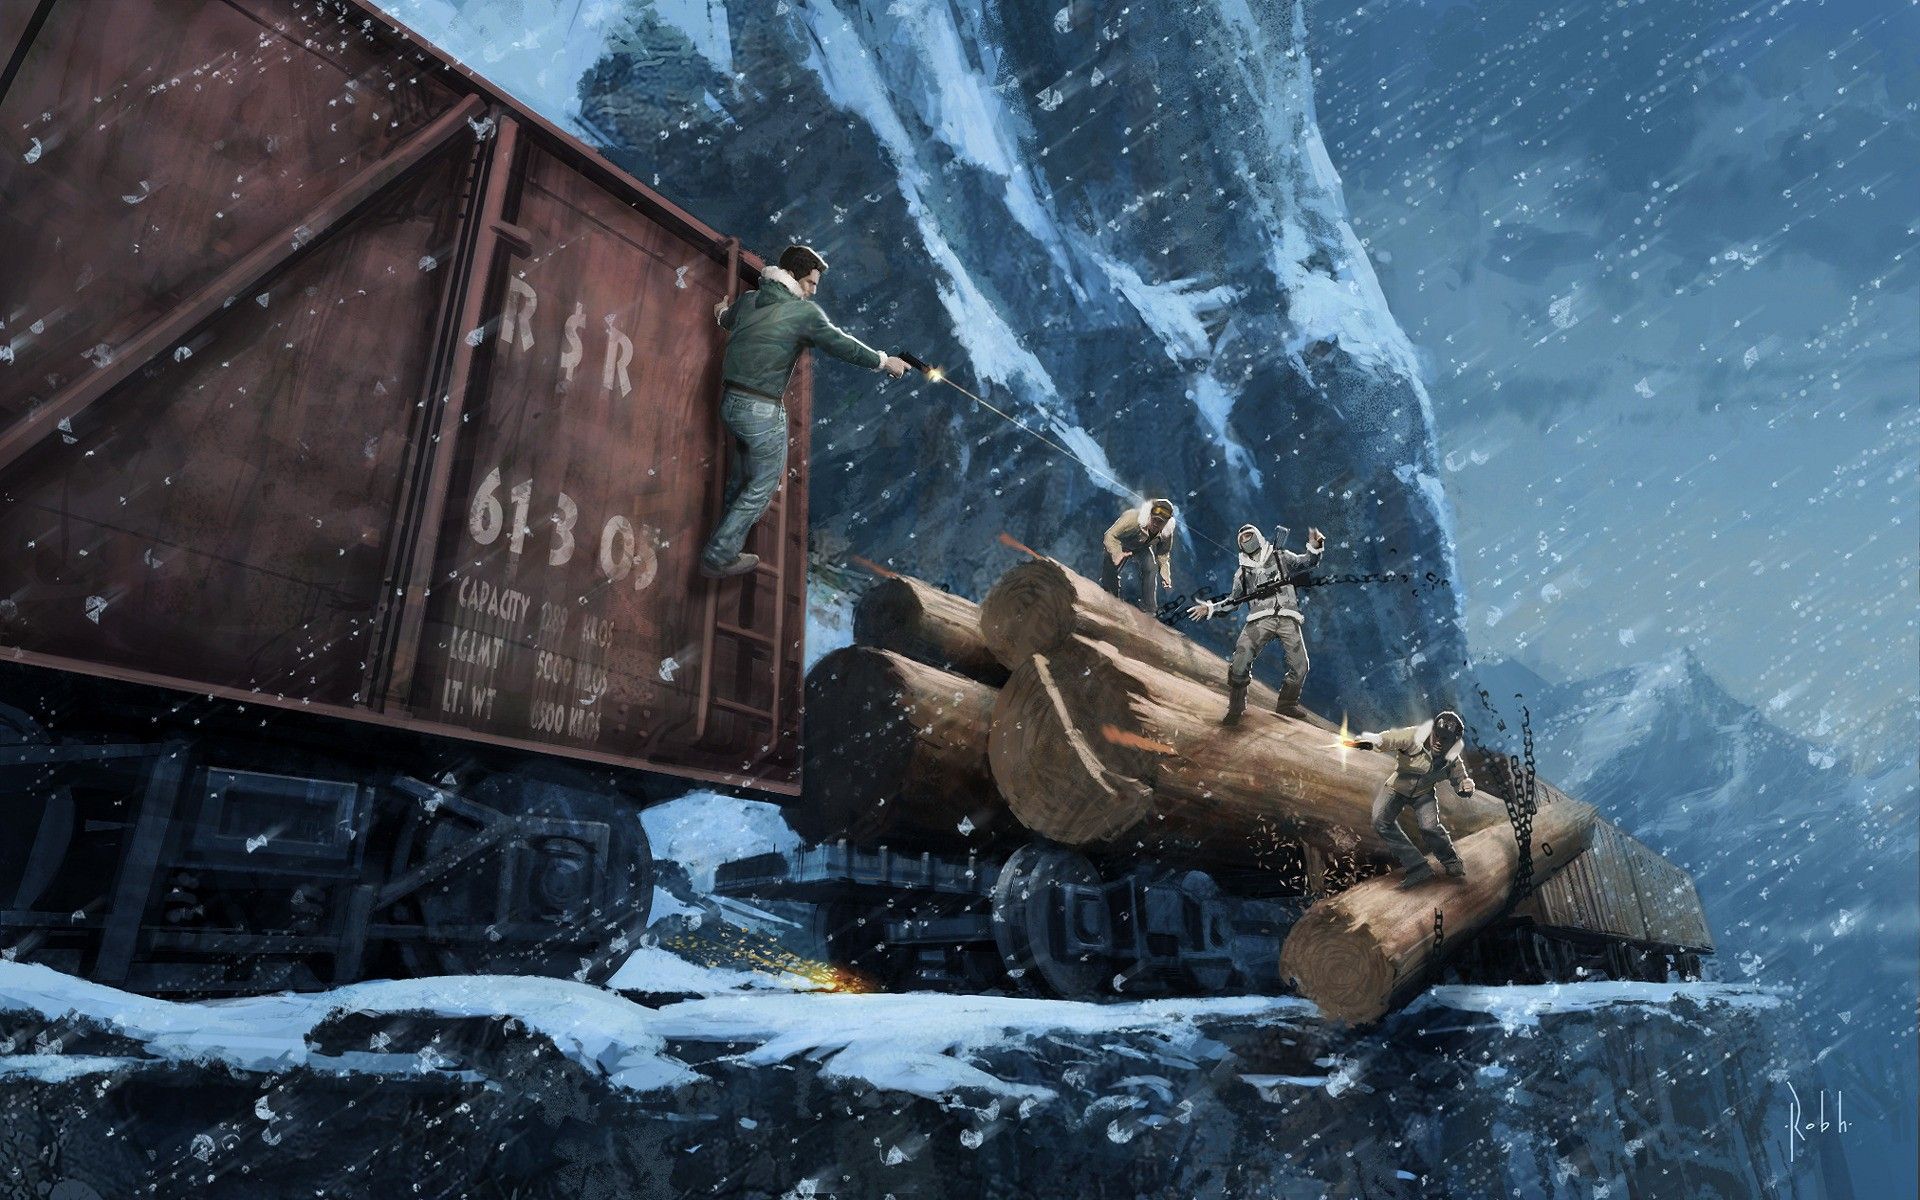 Winter, train, railroad, snow, mountains, wallpaper, uncharted, month, goodwp, games